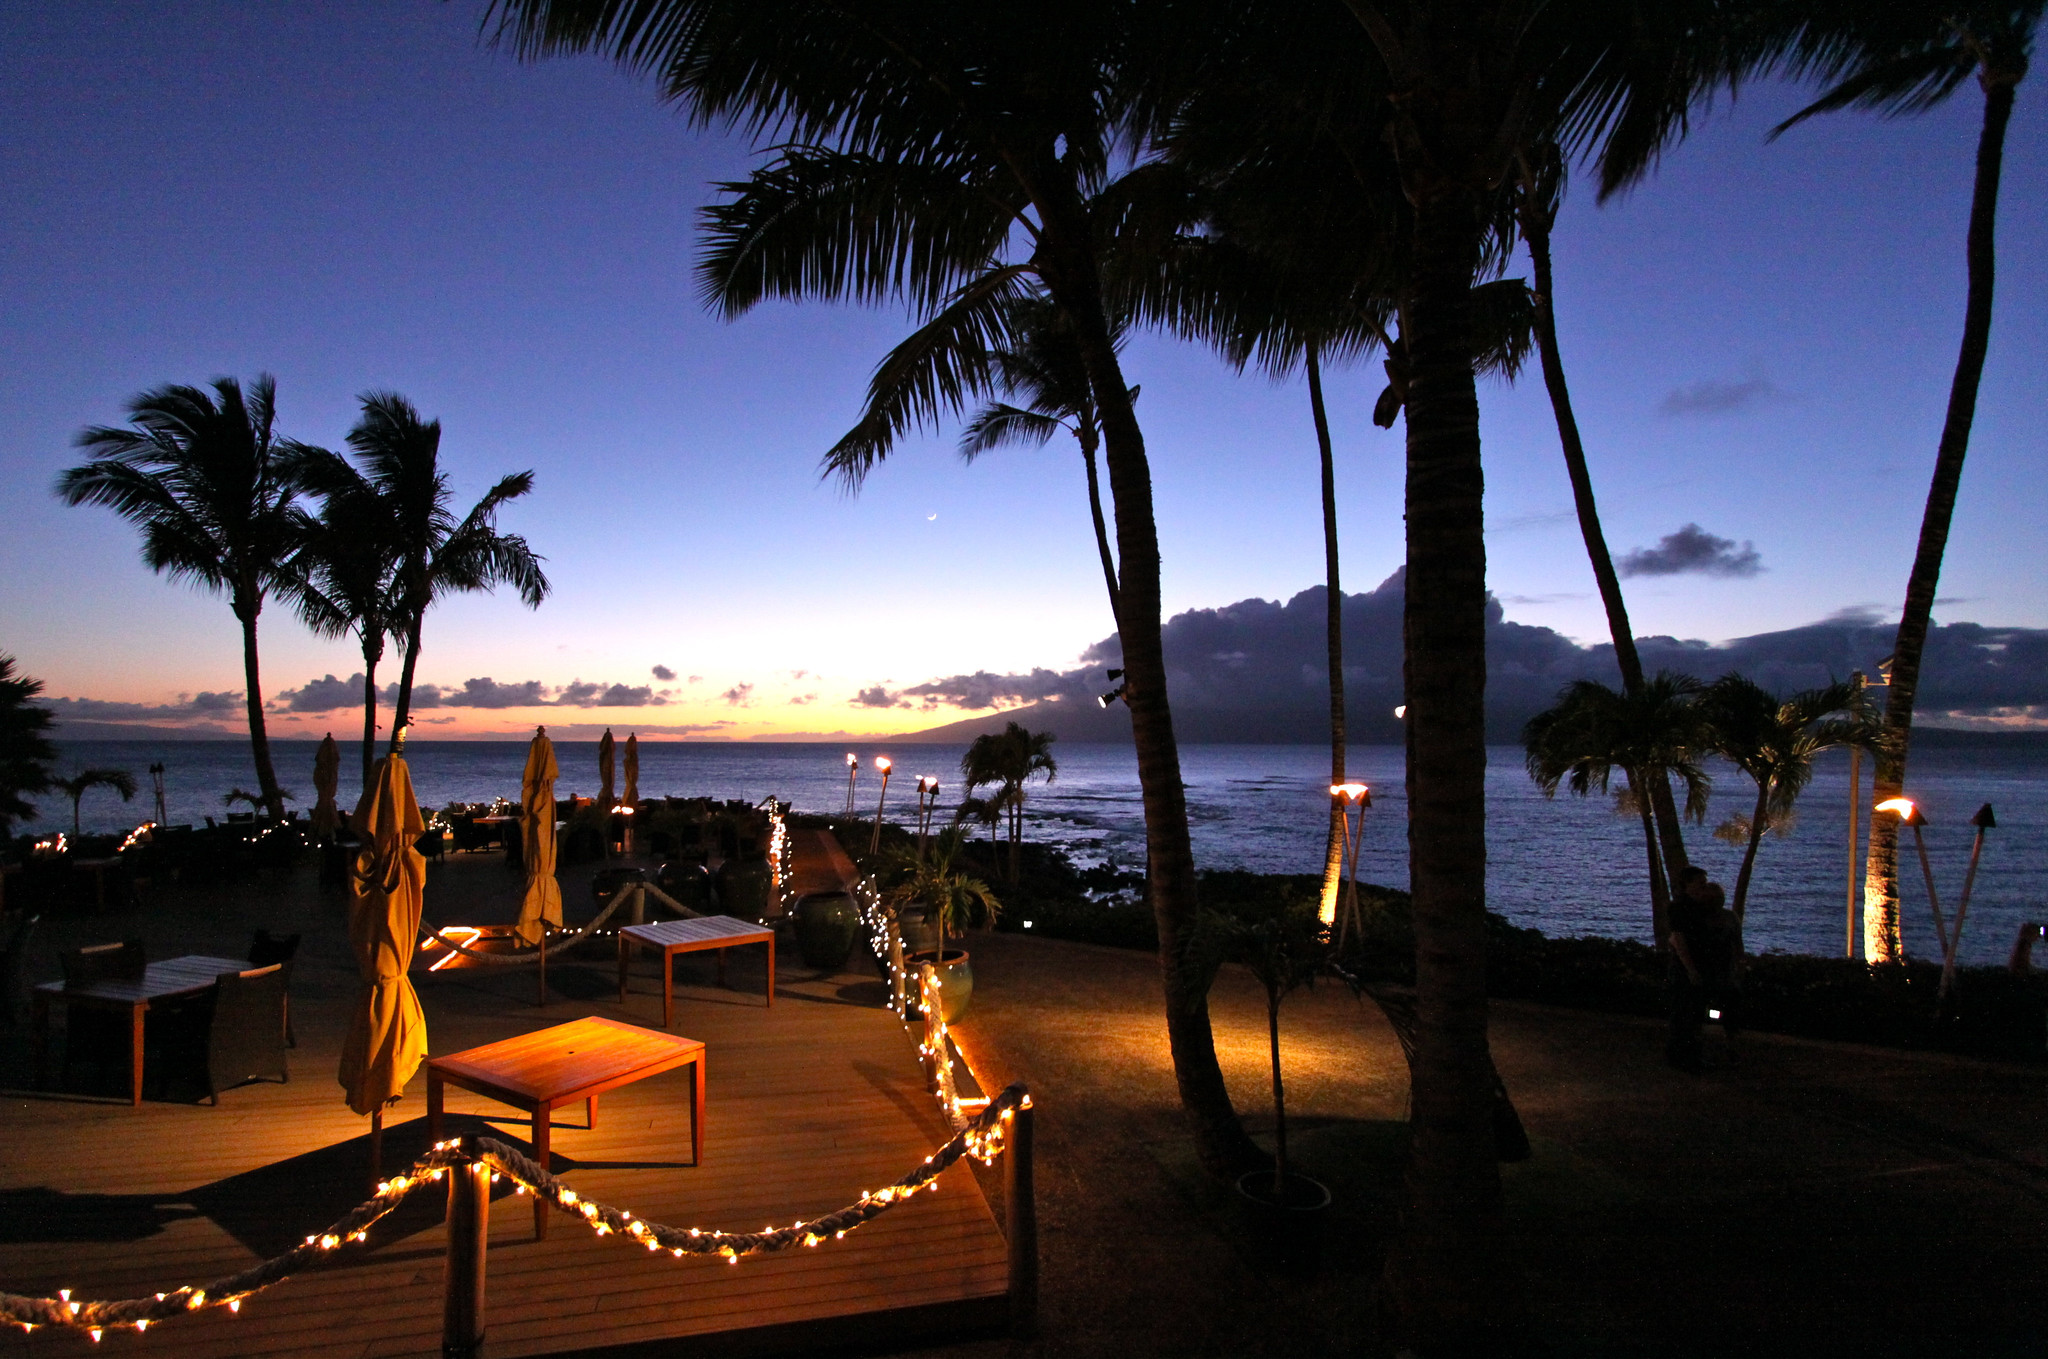 Lovely sunset view at the romantic beach-dining Merriman’s Kapalua, one of the best restaurants in Maui, Hawaii, with series lights interlaced with ropes and palm trees silhouette 